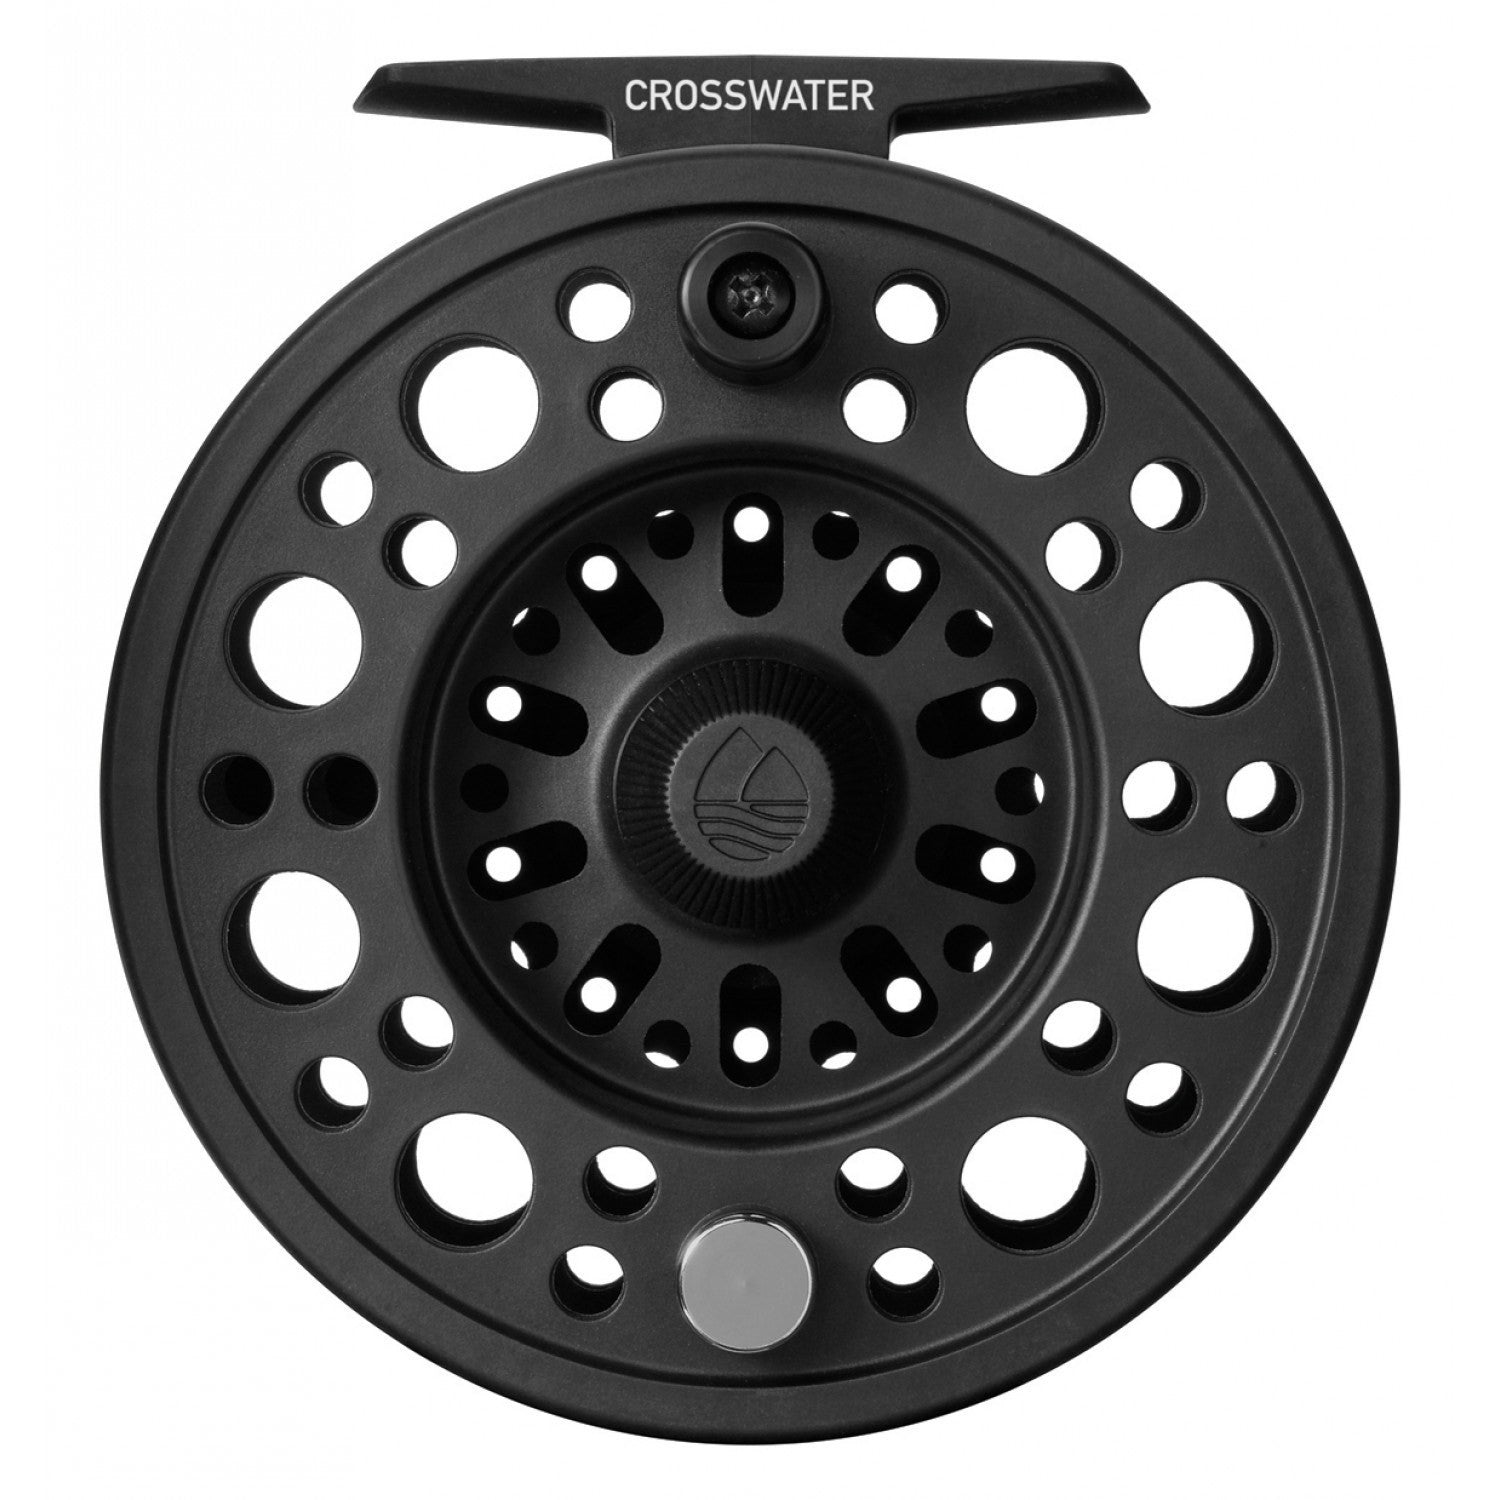 Redington Fishing Reel and Line Crosswater 4/5/6 5-5501R456SCP – Sportique